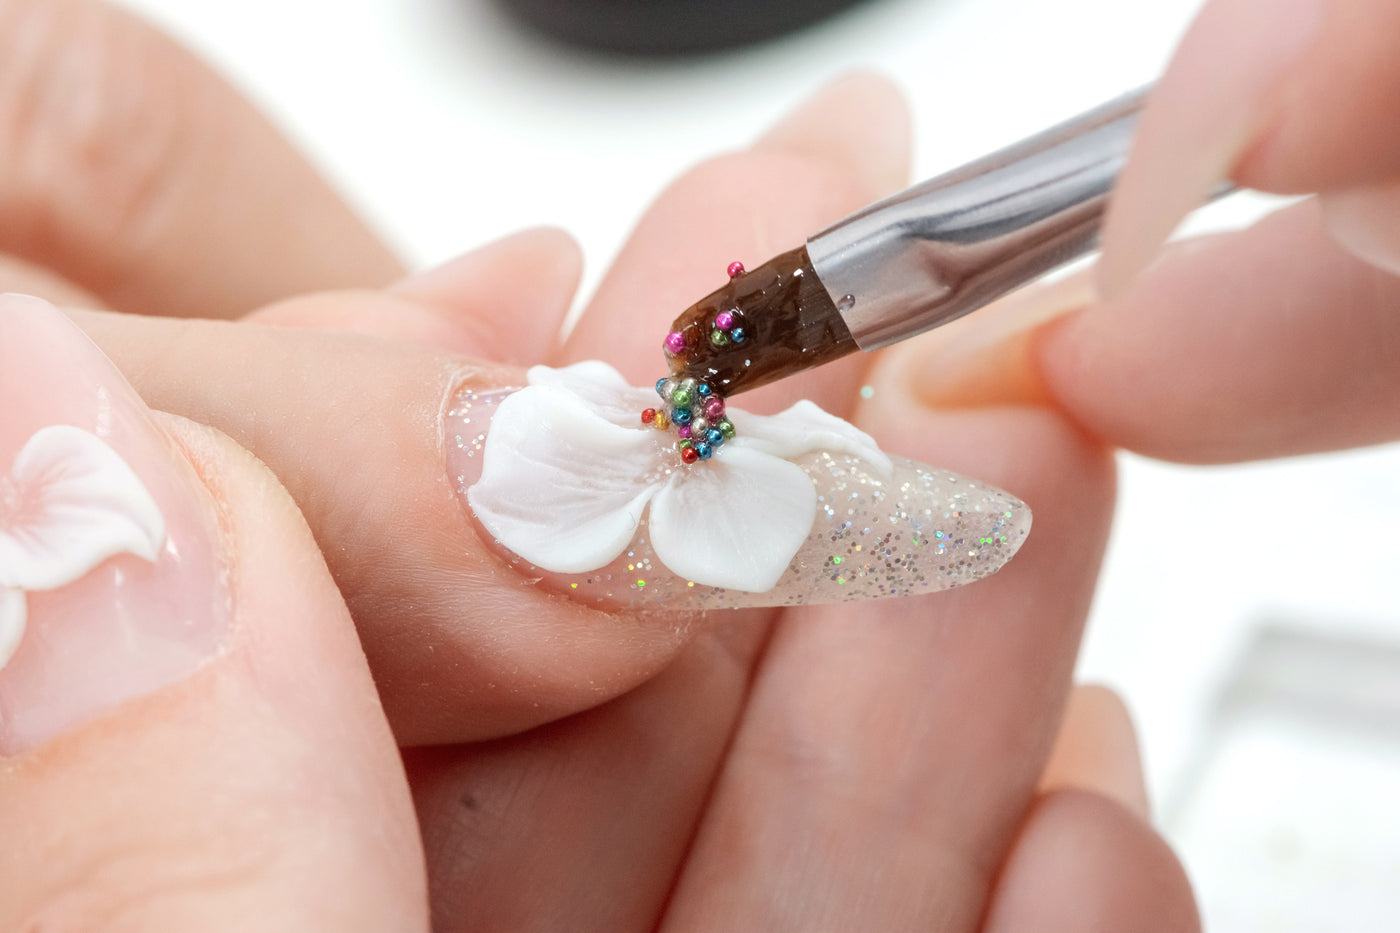 3D Nail Art being applied by a brush.